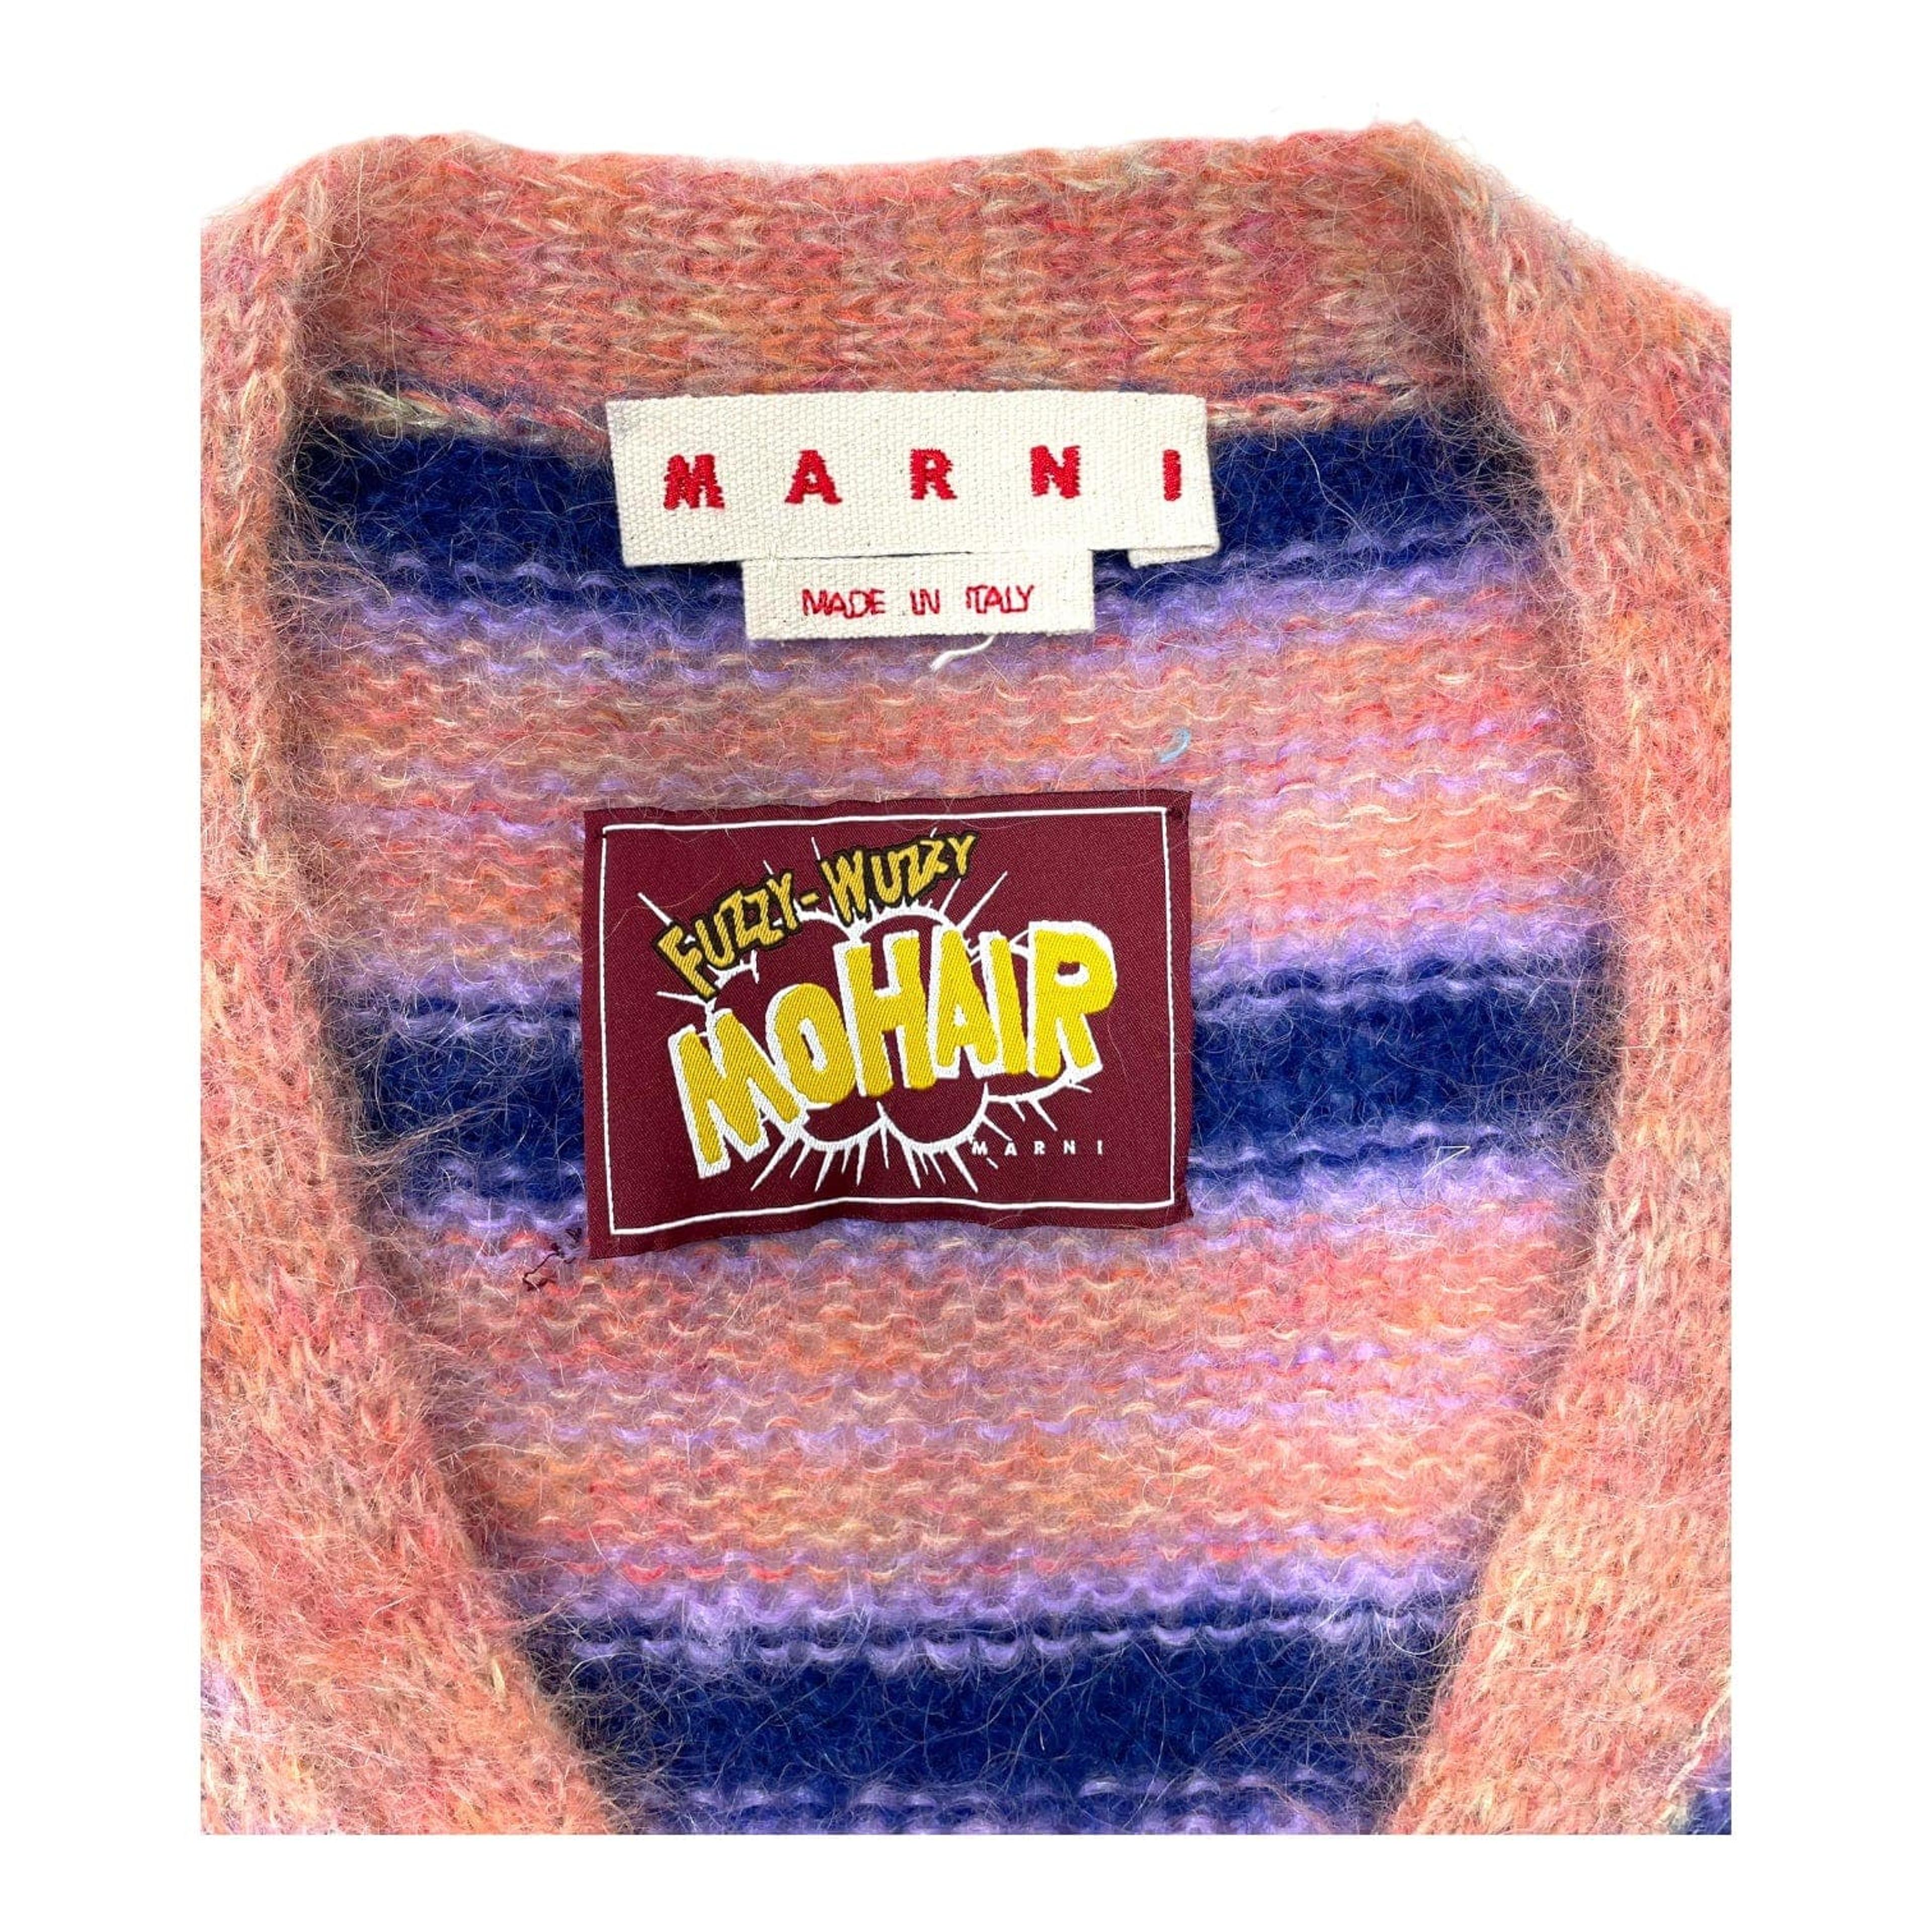 Alternate View 2 of Marni Striped Mohair Cardigan Pink Purple Pre-Owned